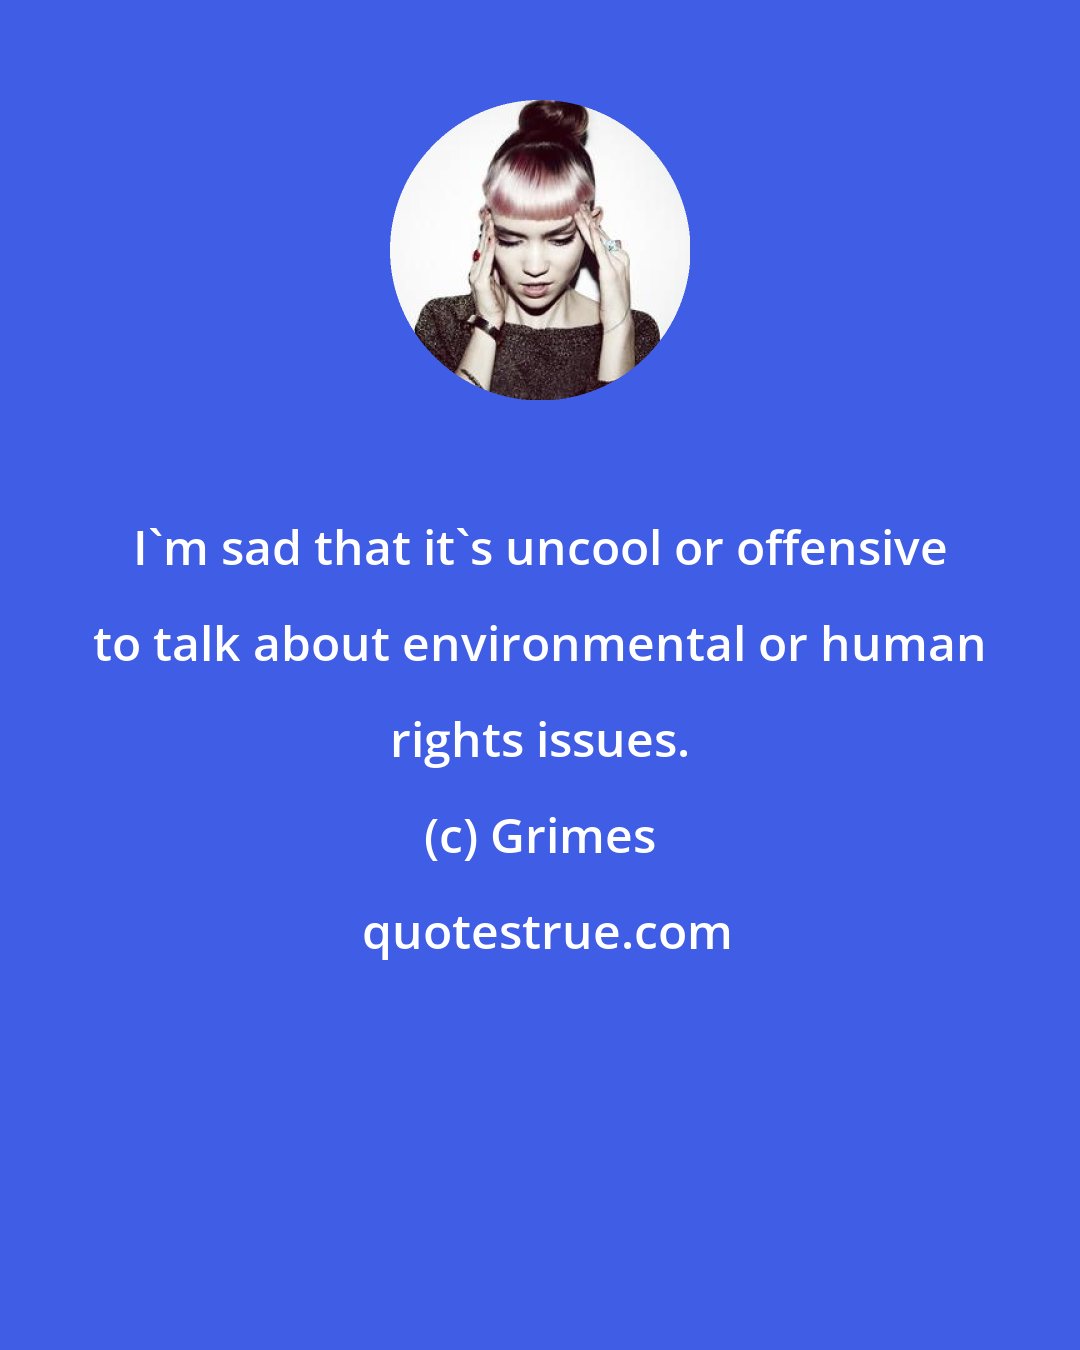 Grimes: I'm sad that it's uncool or offensive to talk about environmental or human rights issues.